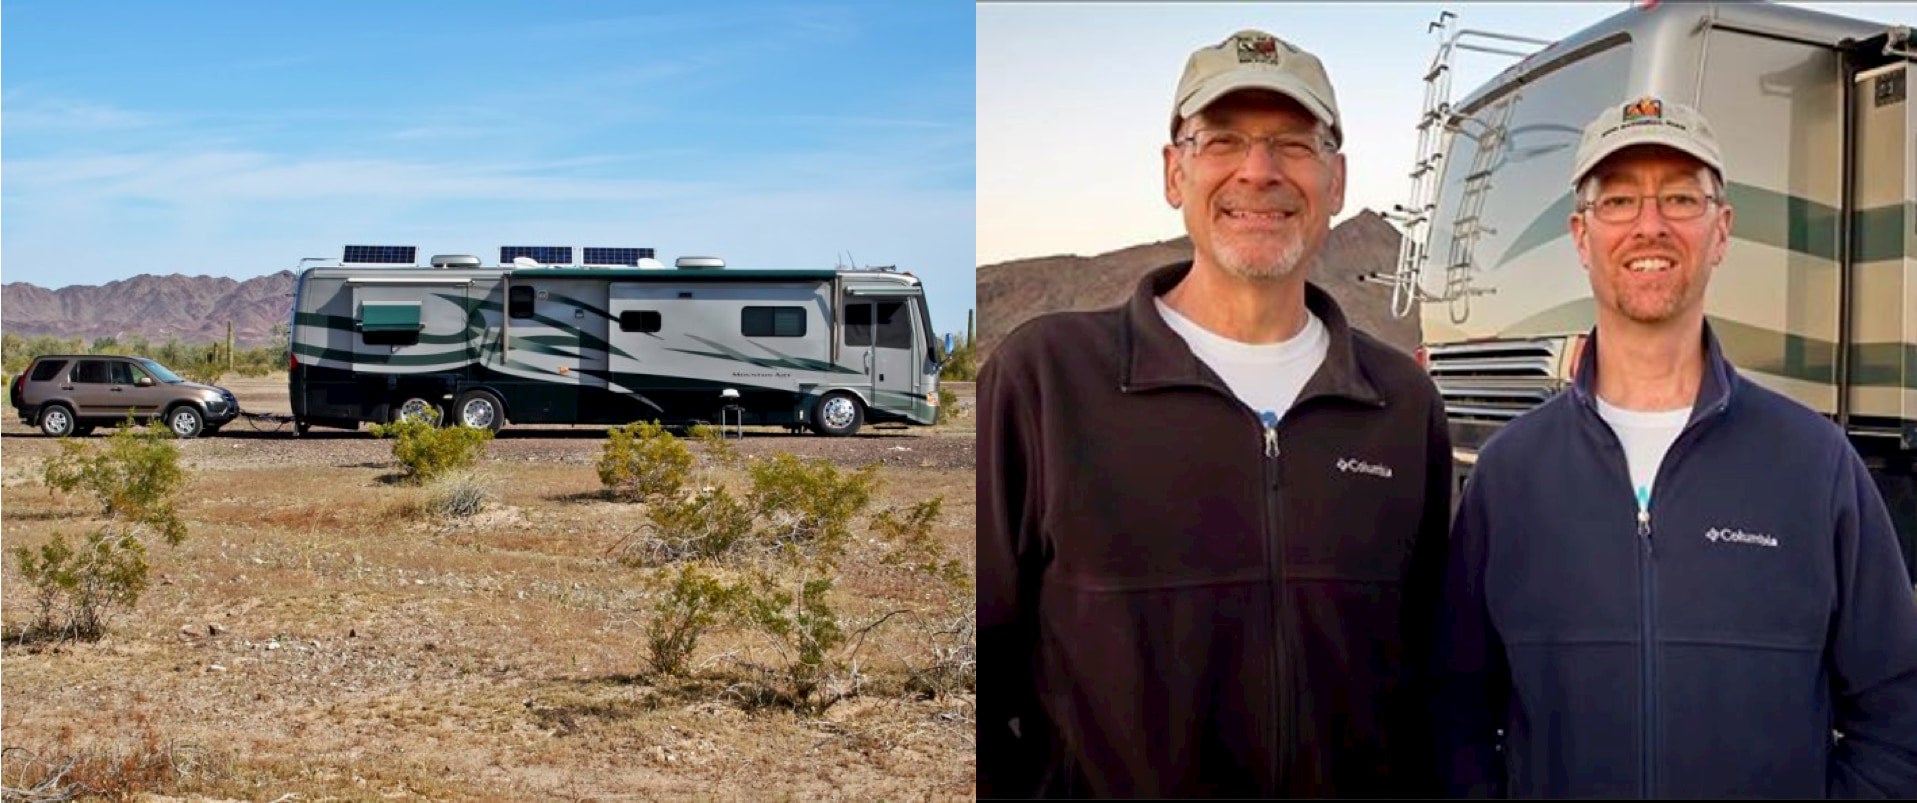 an RV on the road in a desert next to an image of john and peter from the RVGeeks